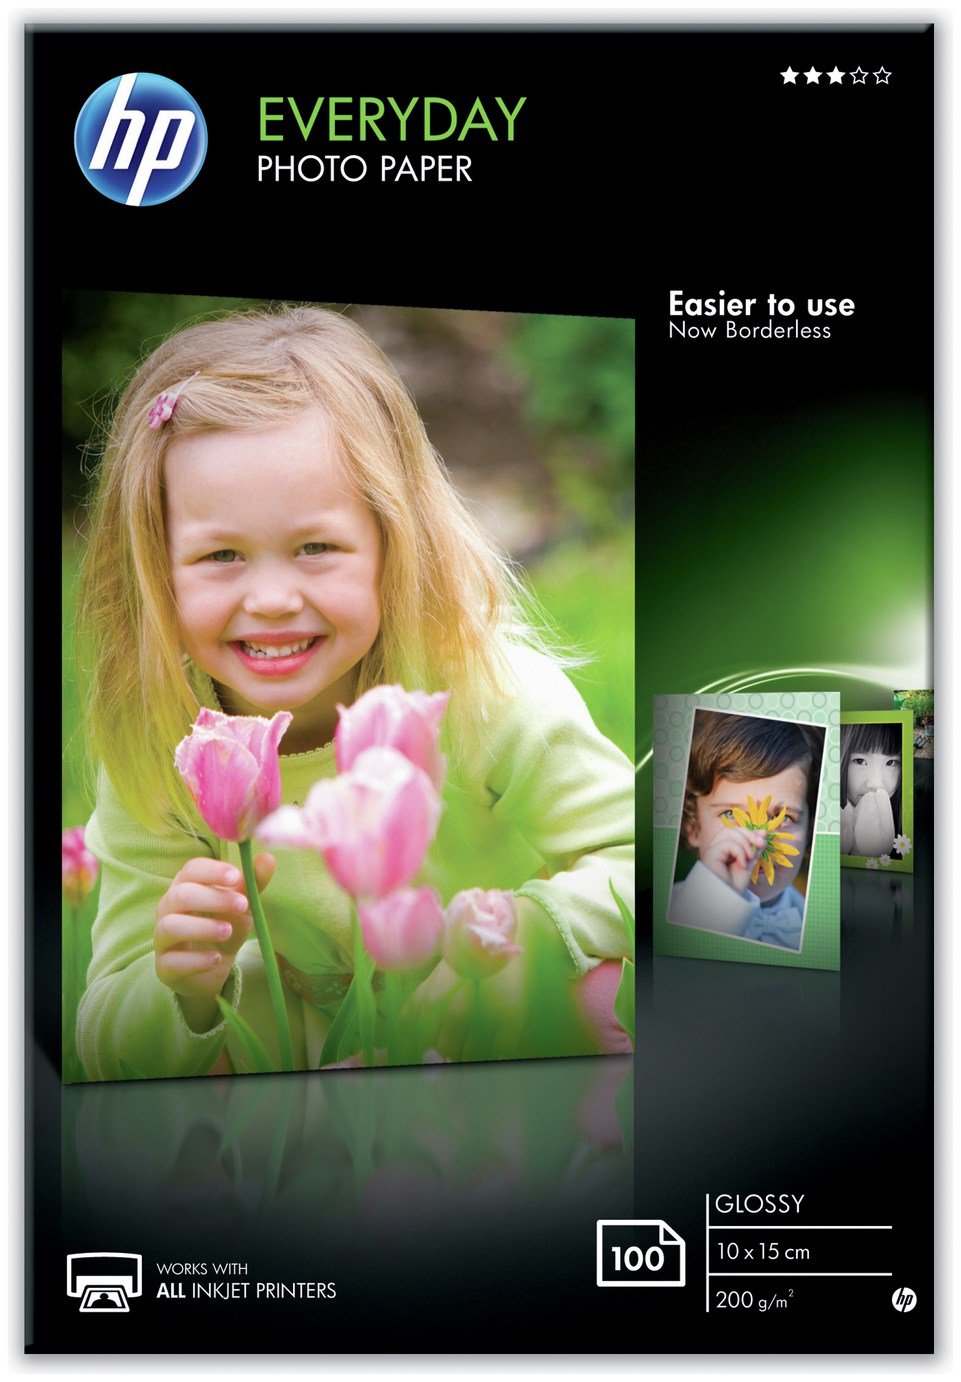 HP Everyday 10x15cm Gloss Photo Paper Review